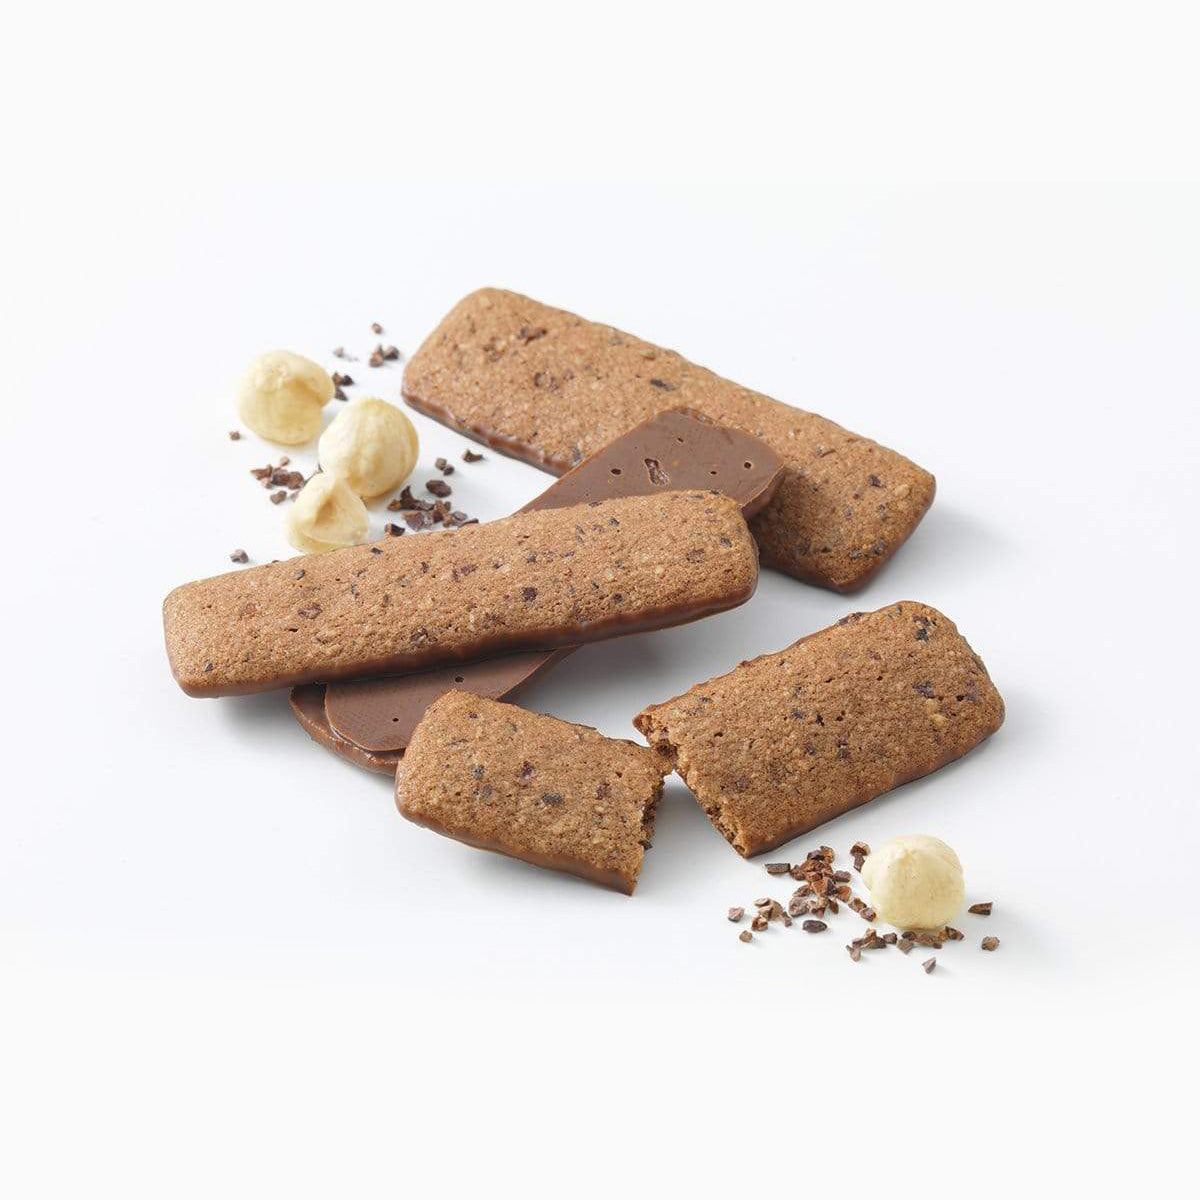 ROYCE' Chocolate - Baton Cookies "Hazel Cacao" - Image shows brown cookies with brown chocolate chips coated with brown chocolate. Accents include nuts in various shapes and chocolate shavings.